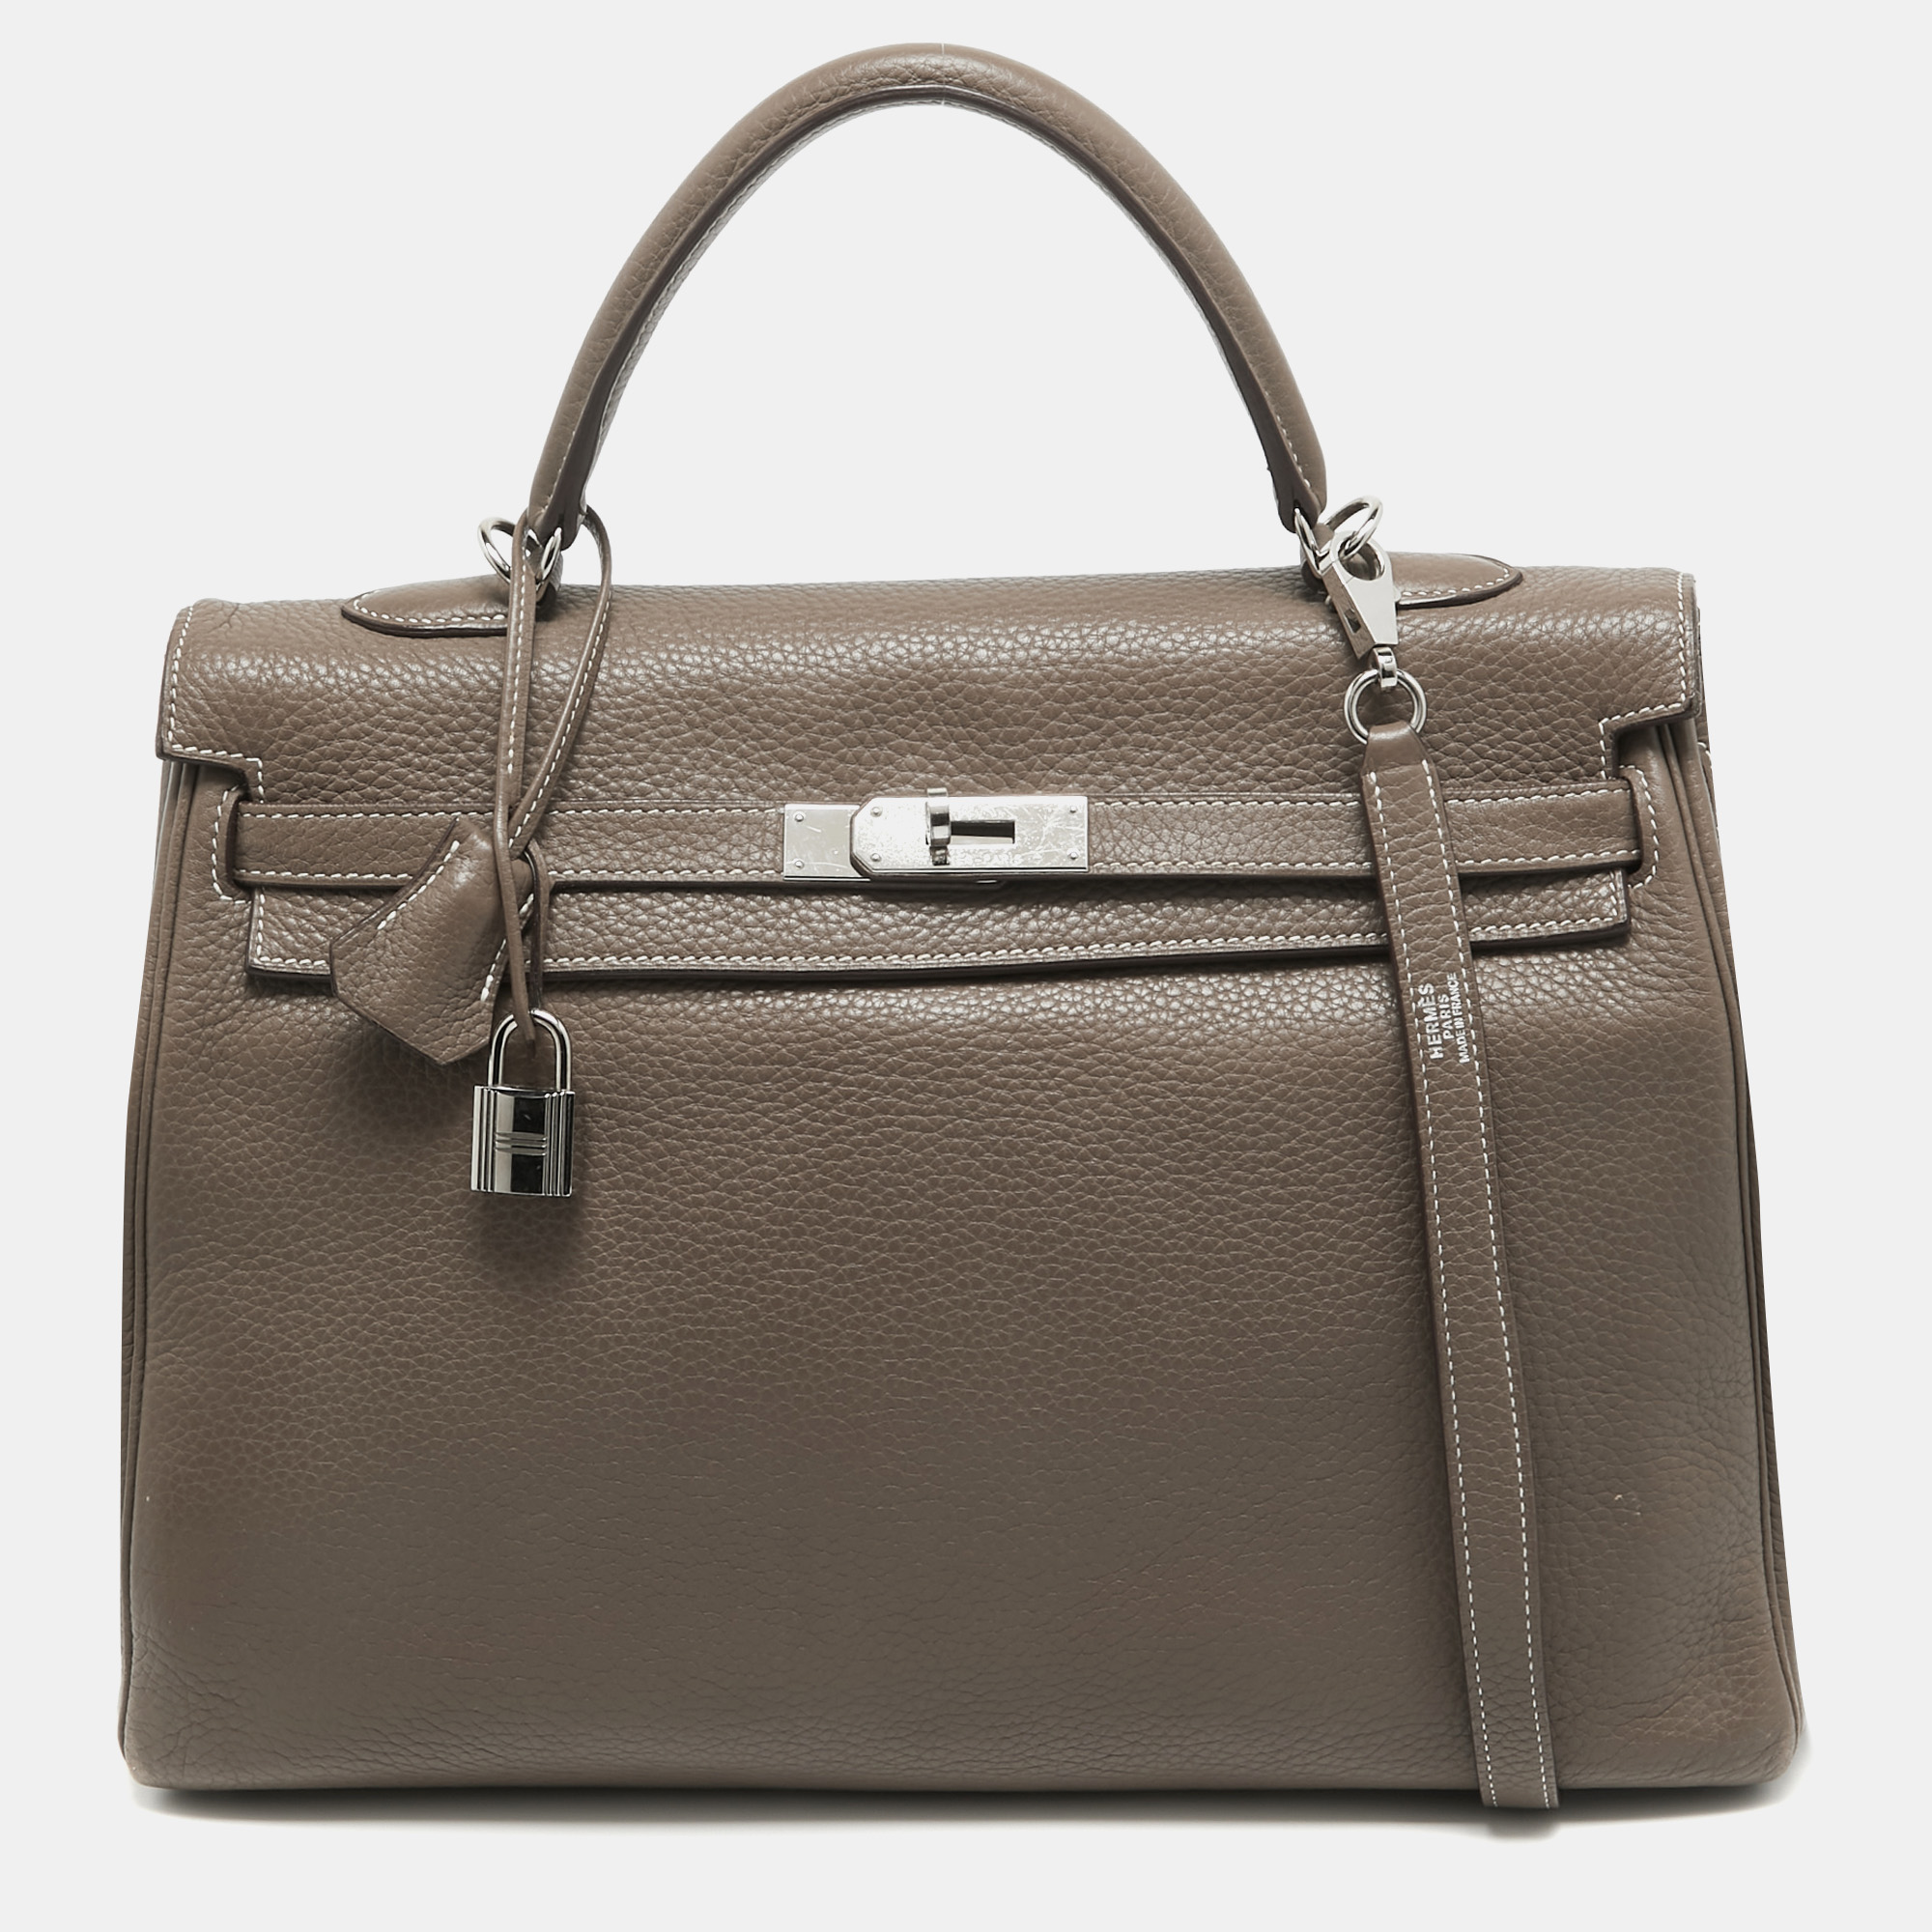 The Hermes Kelly is beautiful as it is carefully hand stitched to perfection. This Kelly Retourne is crafted from Taurillion Clemence leather and has palladium finish hardware. Retourne has a more casual look and is stitched on the inside thus making its edges softer. The bag comes with a turn lock closure single top rolled leather handle shoulder strap and a padlock with its keys within a clochette. The leather lined interior houses pockets and enough space to easily fit in all your daily necessities. Invest in this beauty today